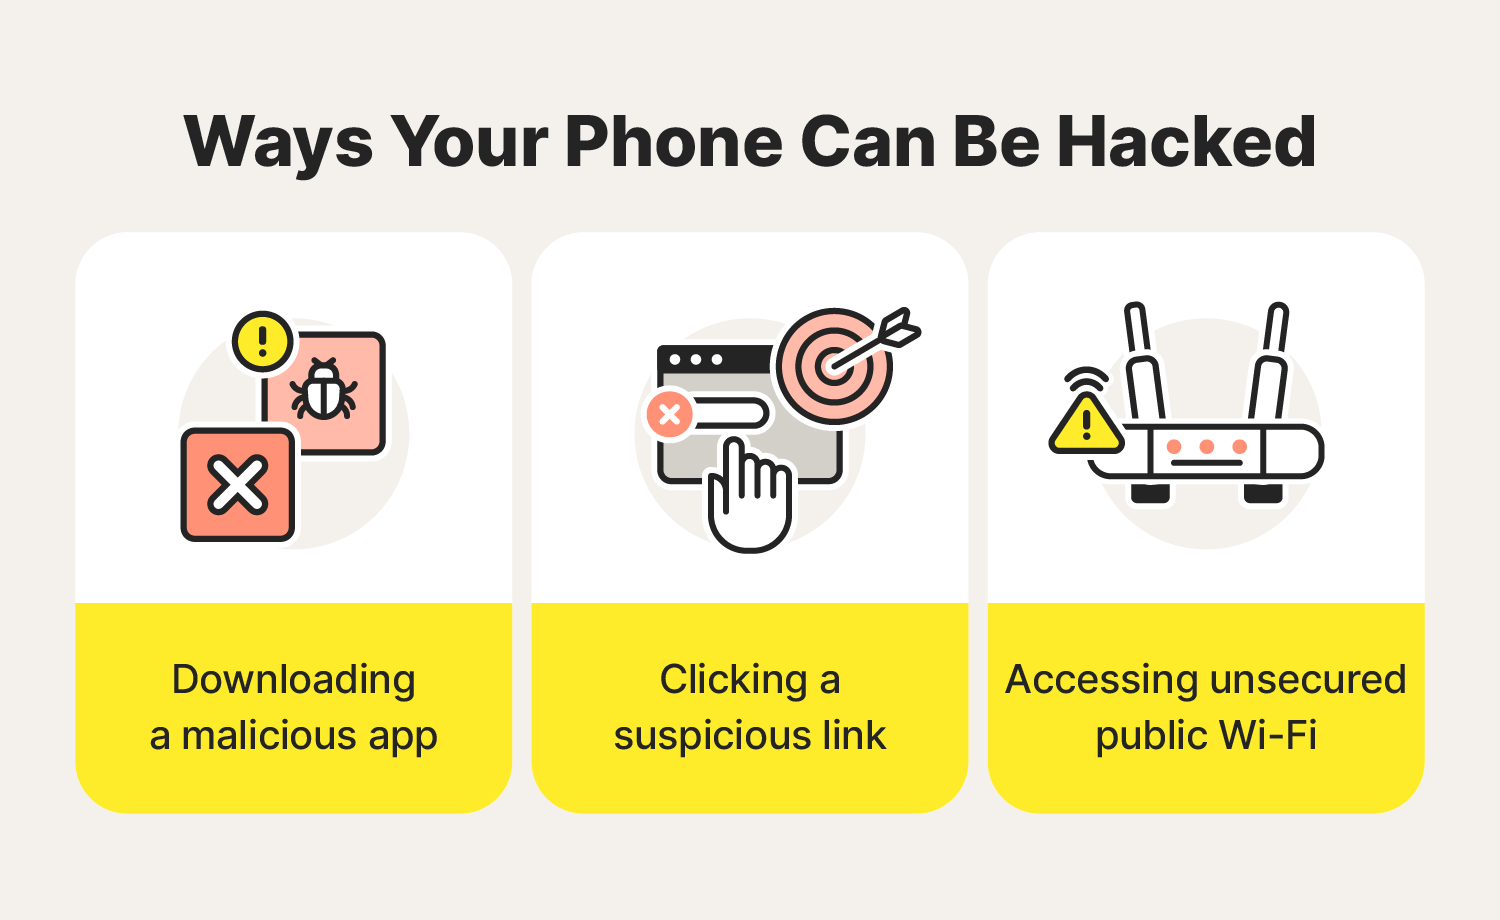 A graphic showcases the different ways your phone can be hacked, something you might wonder about after asking yourself, “Is my phone hacked?”